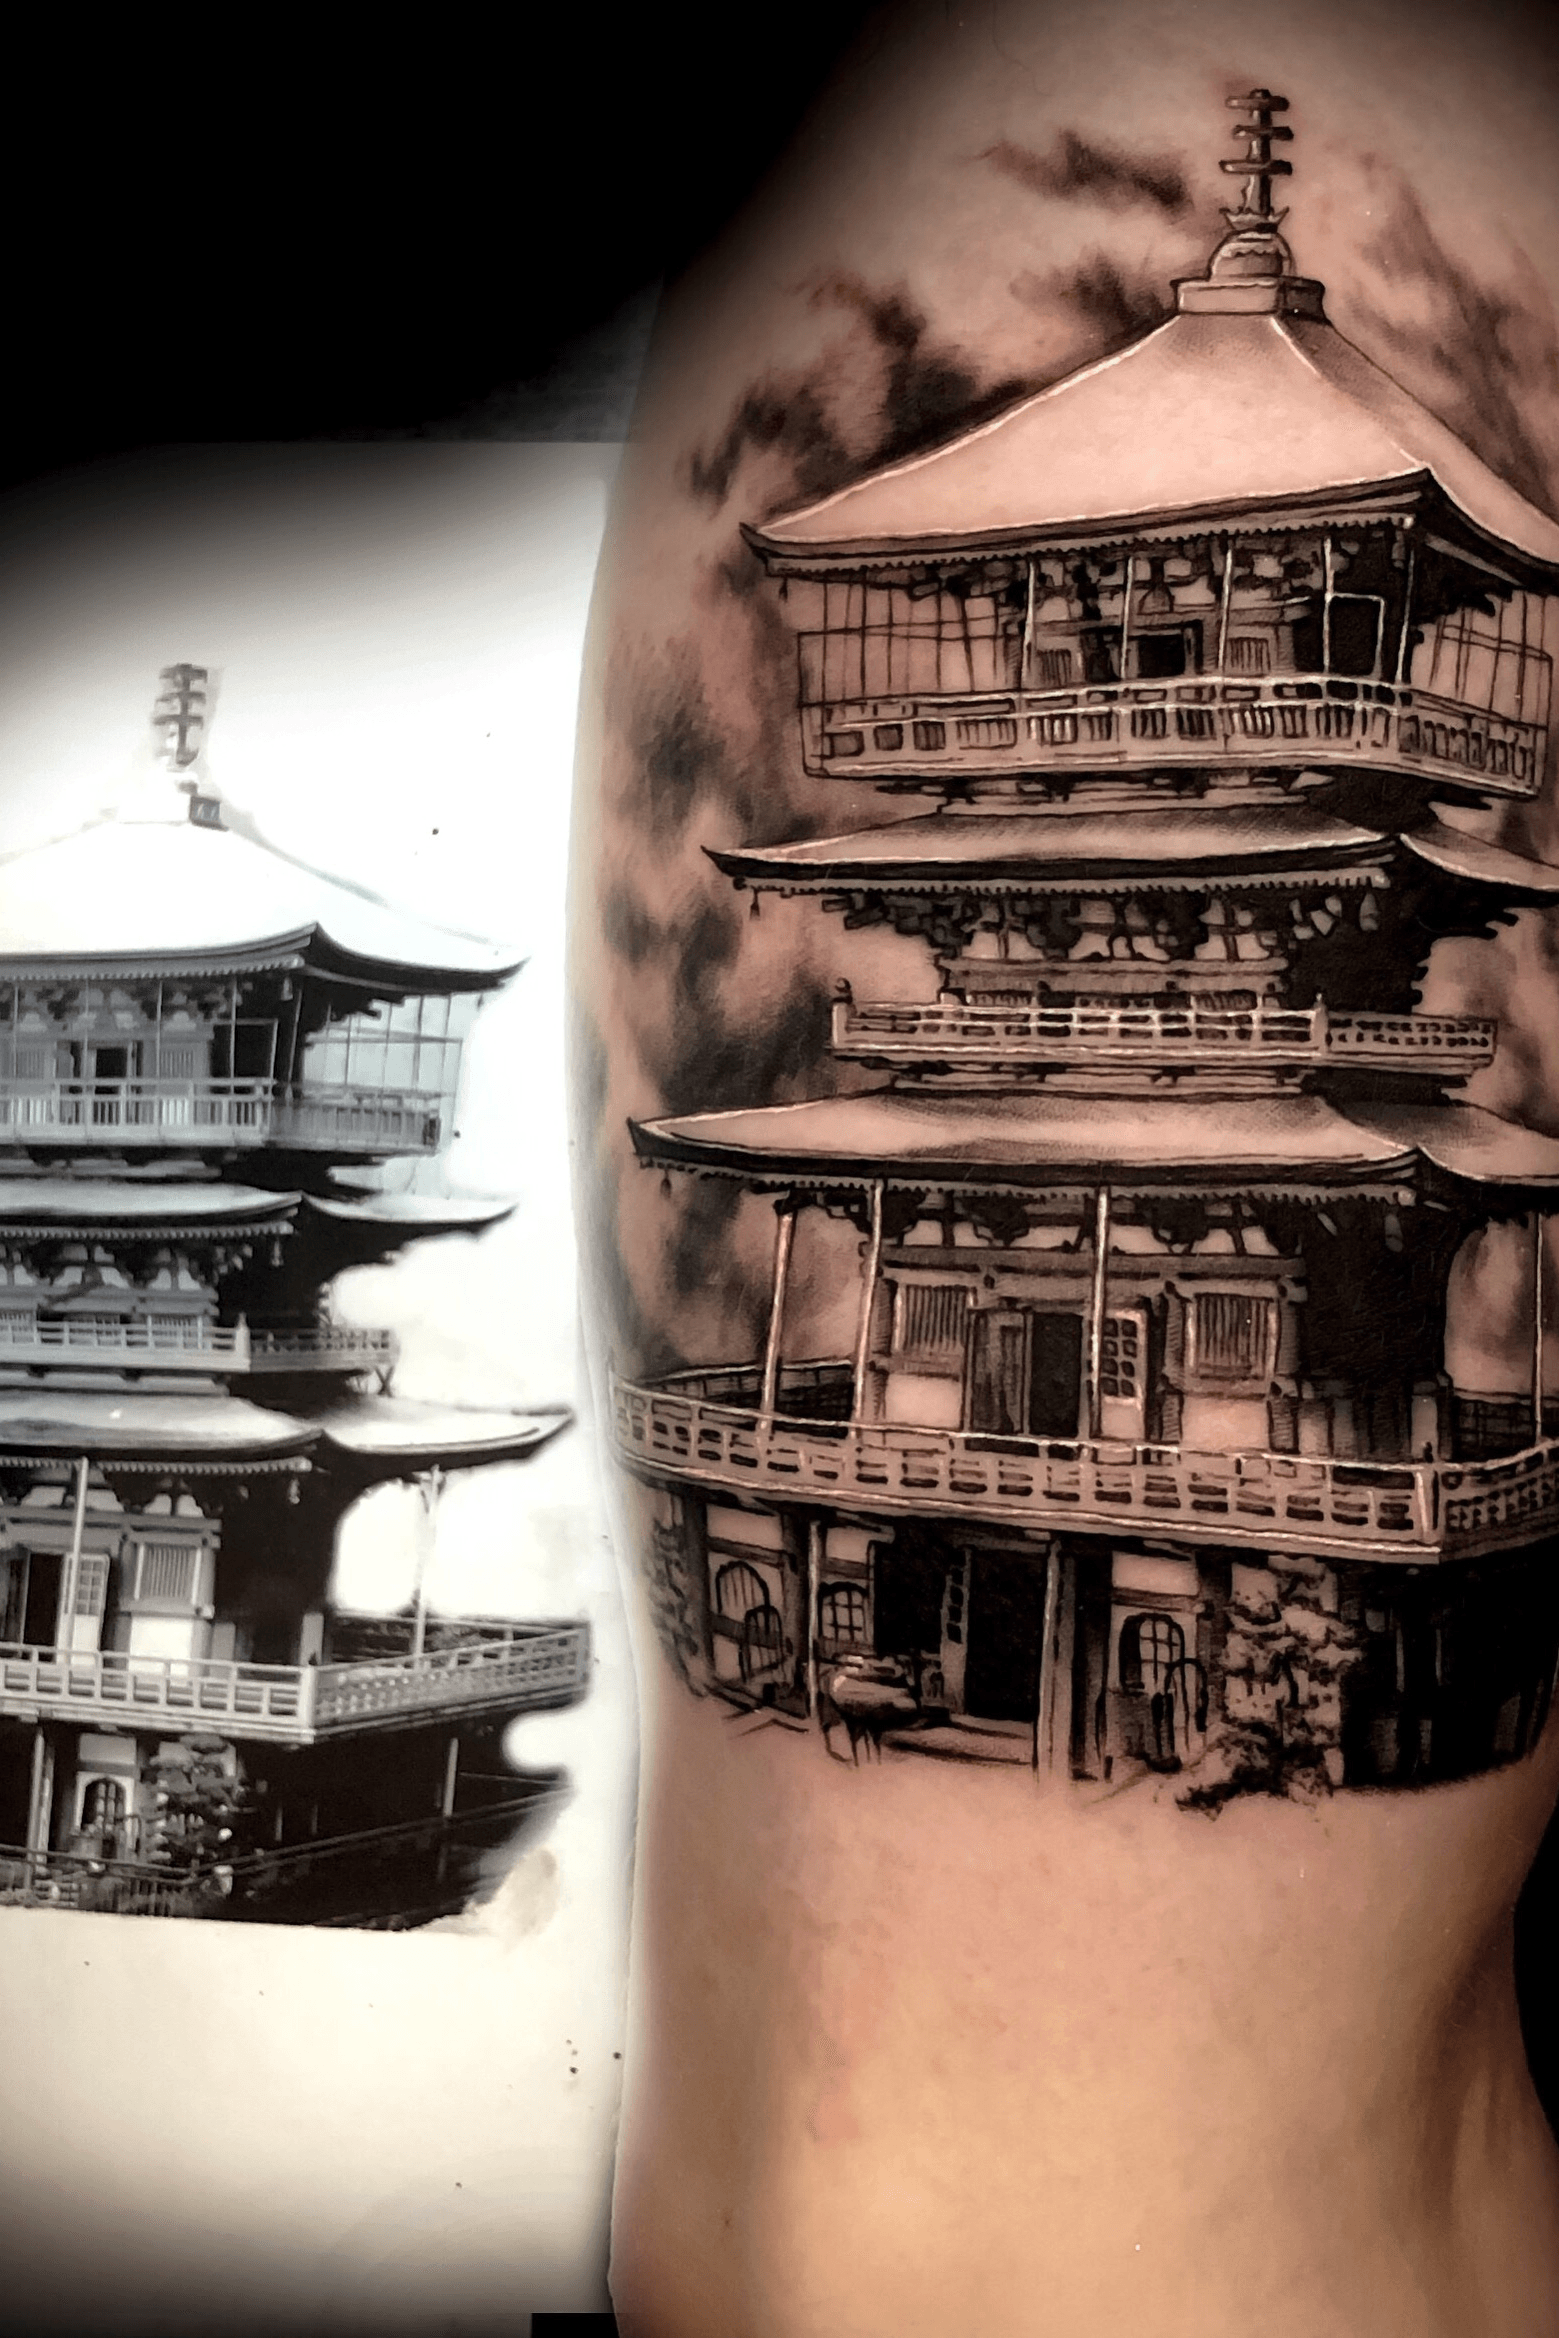 Japanese Mountain Tower - Tattoo Design by foxes76133 on DeviantArt